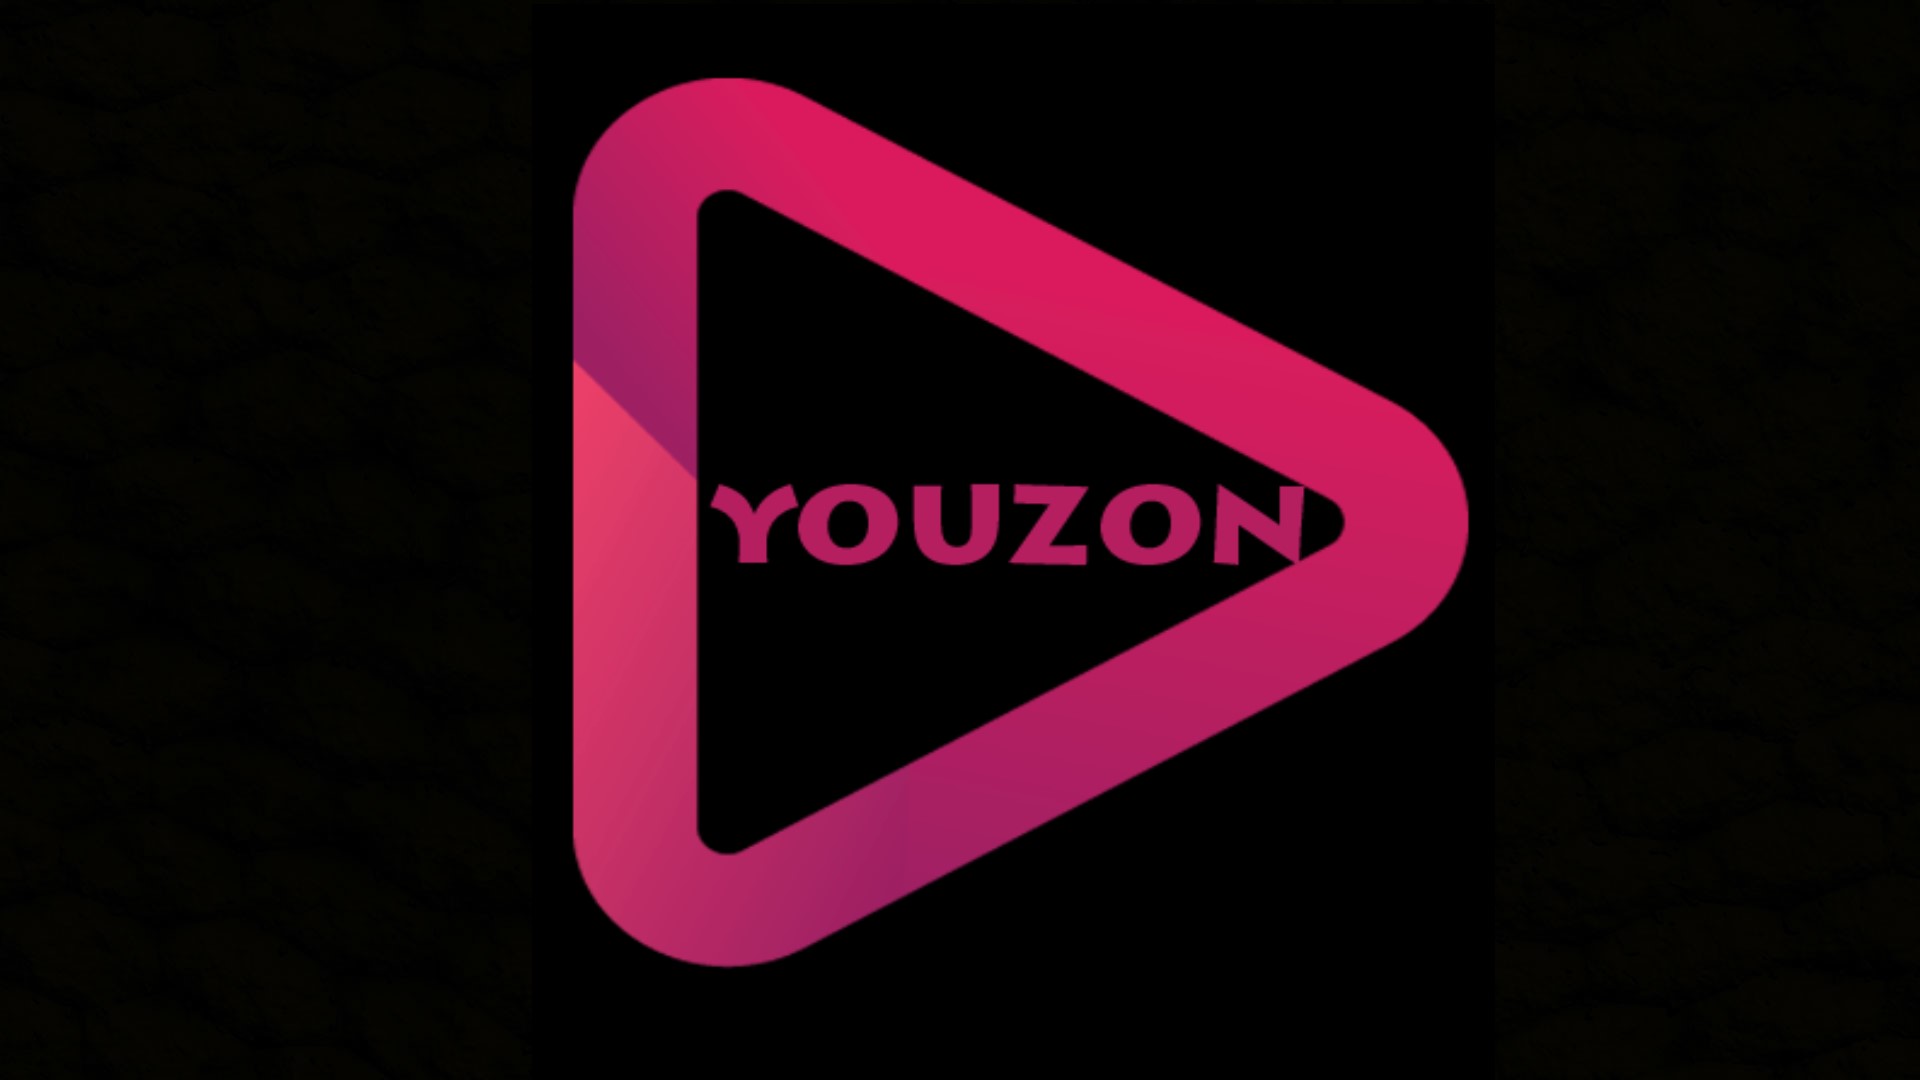 Create Review Videos for Amazon Products with ‘YouZon’!